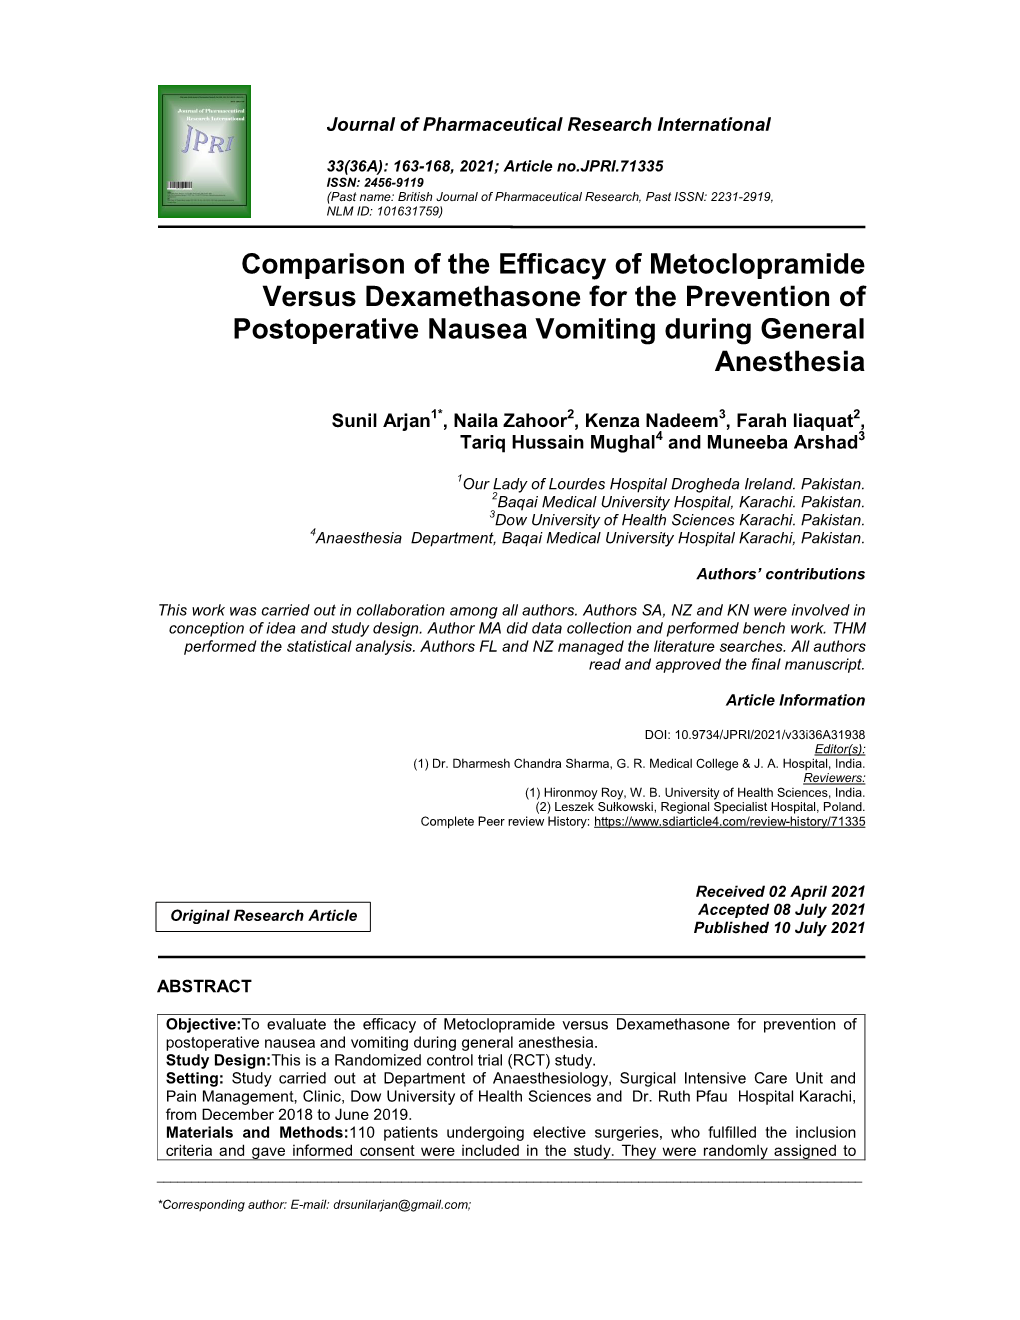 Comparison of the Efficacy of Metoclopramide Versus Dexamethasone for the Prevention of Postoperative Nausea Vomiting During General Anesthesia